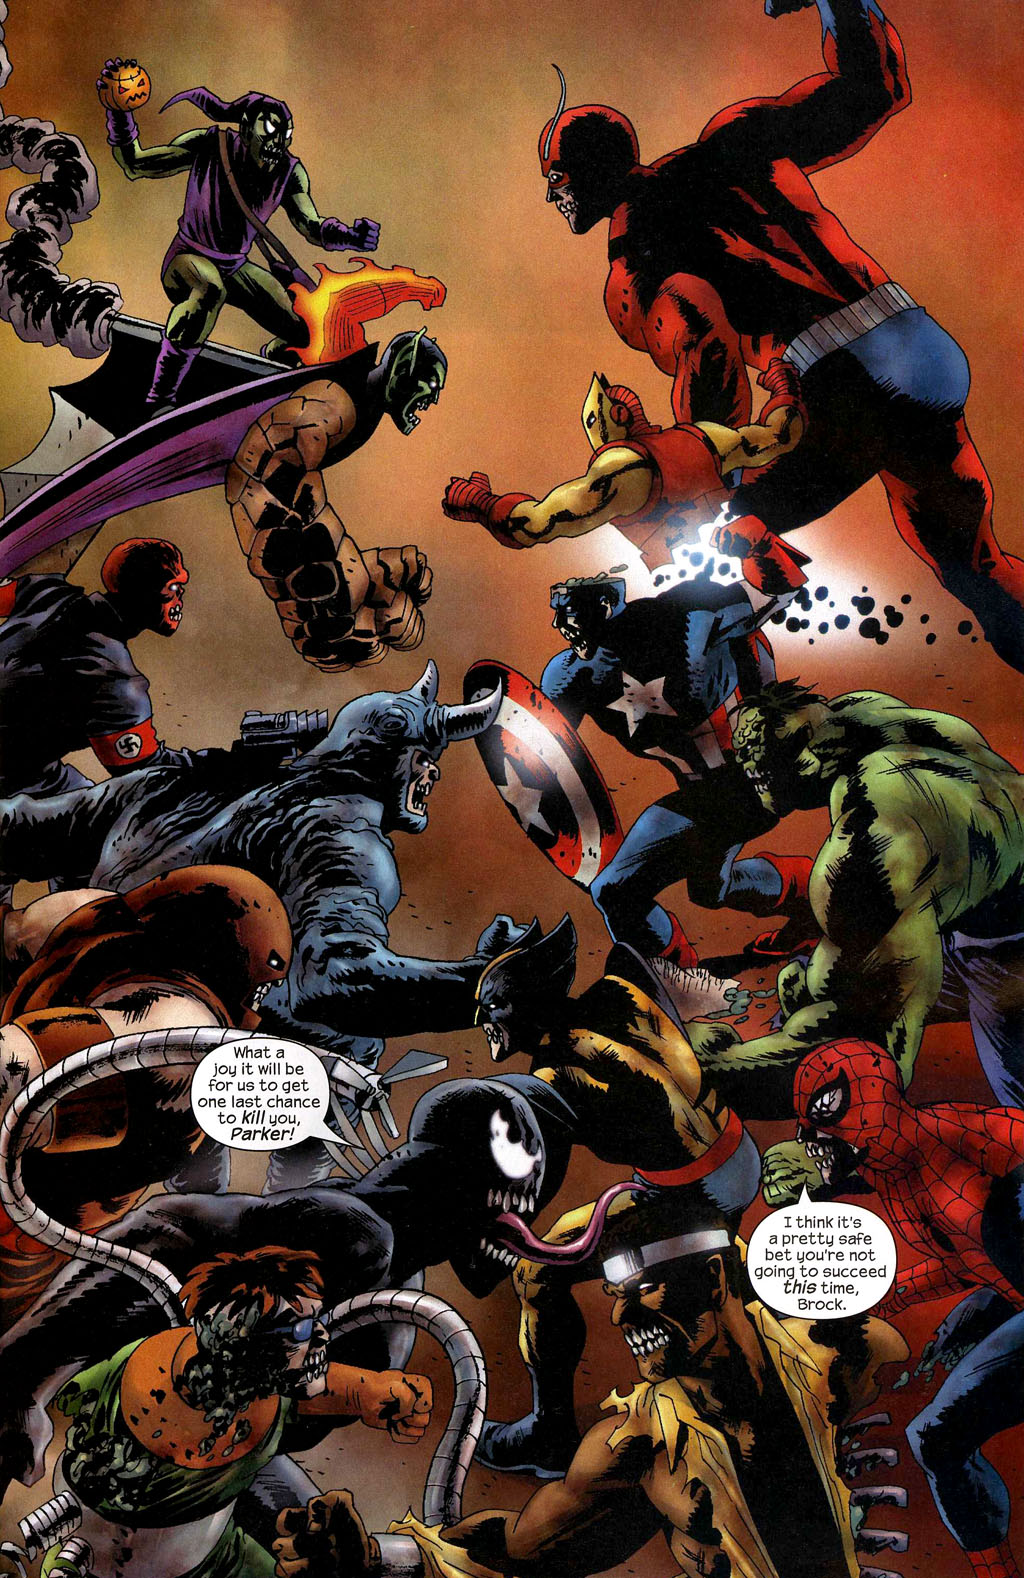 Marvel Zombies 1. Part 5 of 5